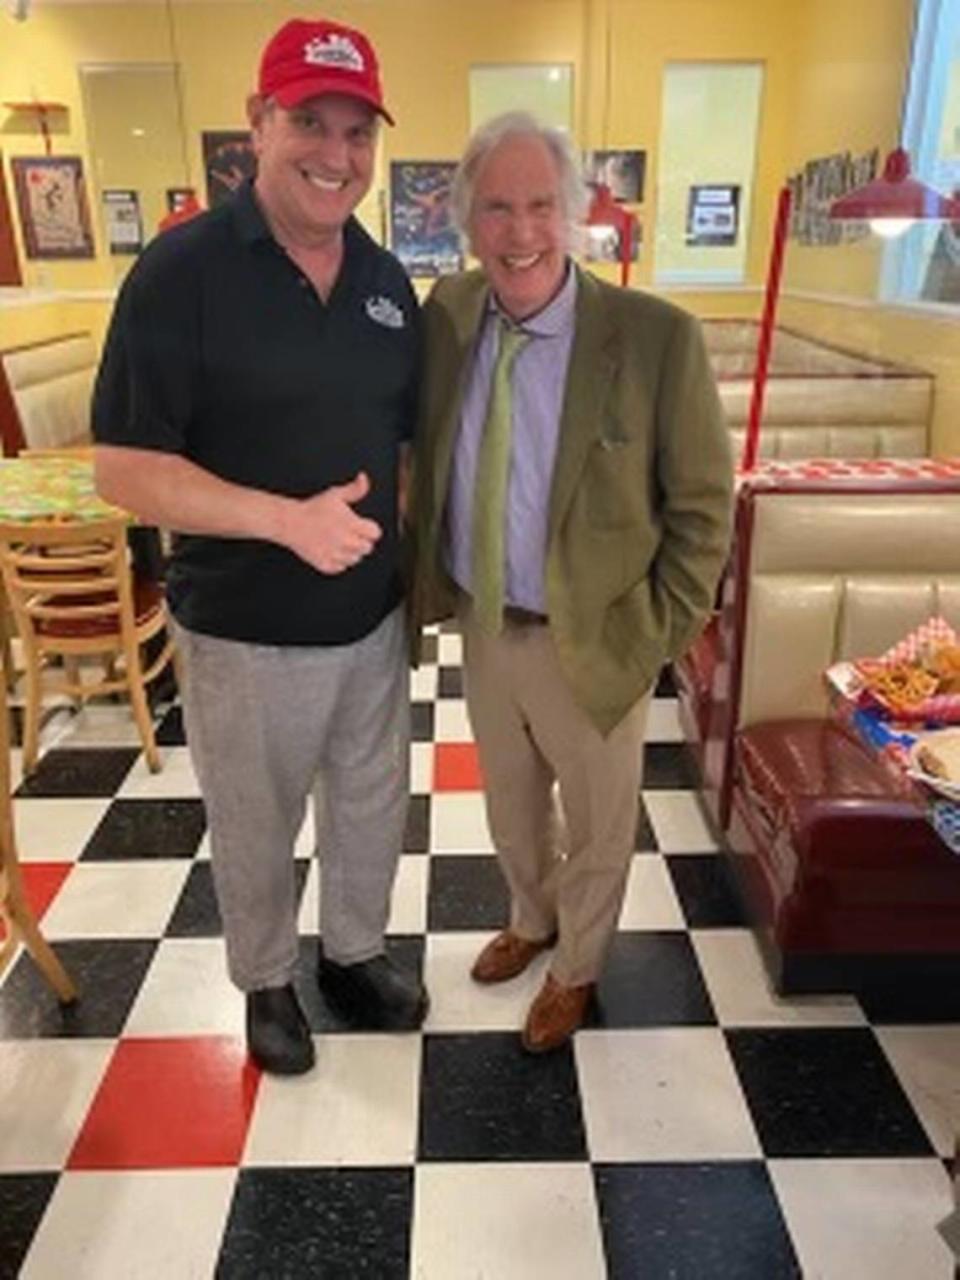 Doo-Dah Diner owner Patrick Shibley poses with famous actor Henry Winkler, who stopped in for lunch on Friday.